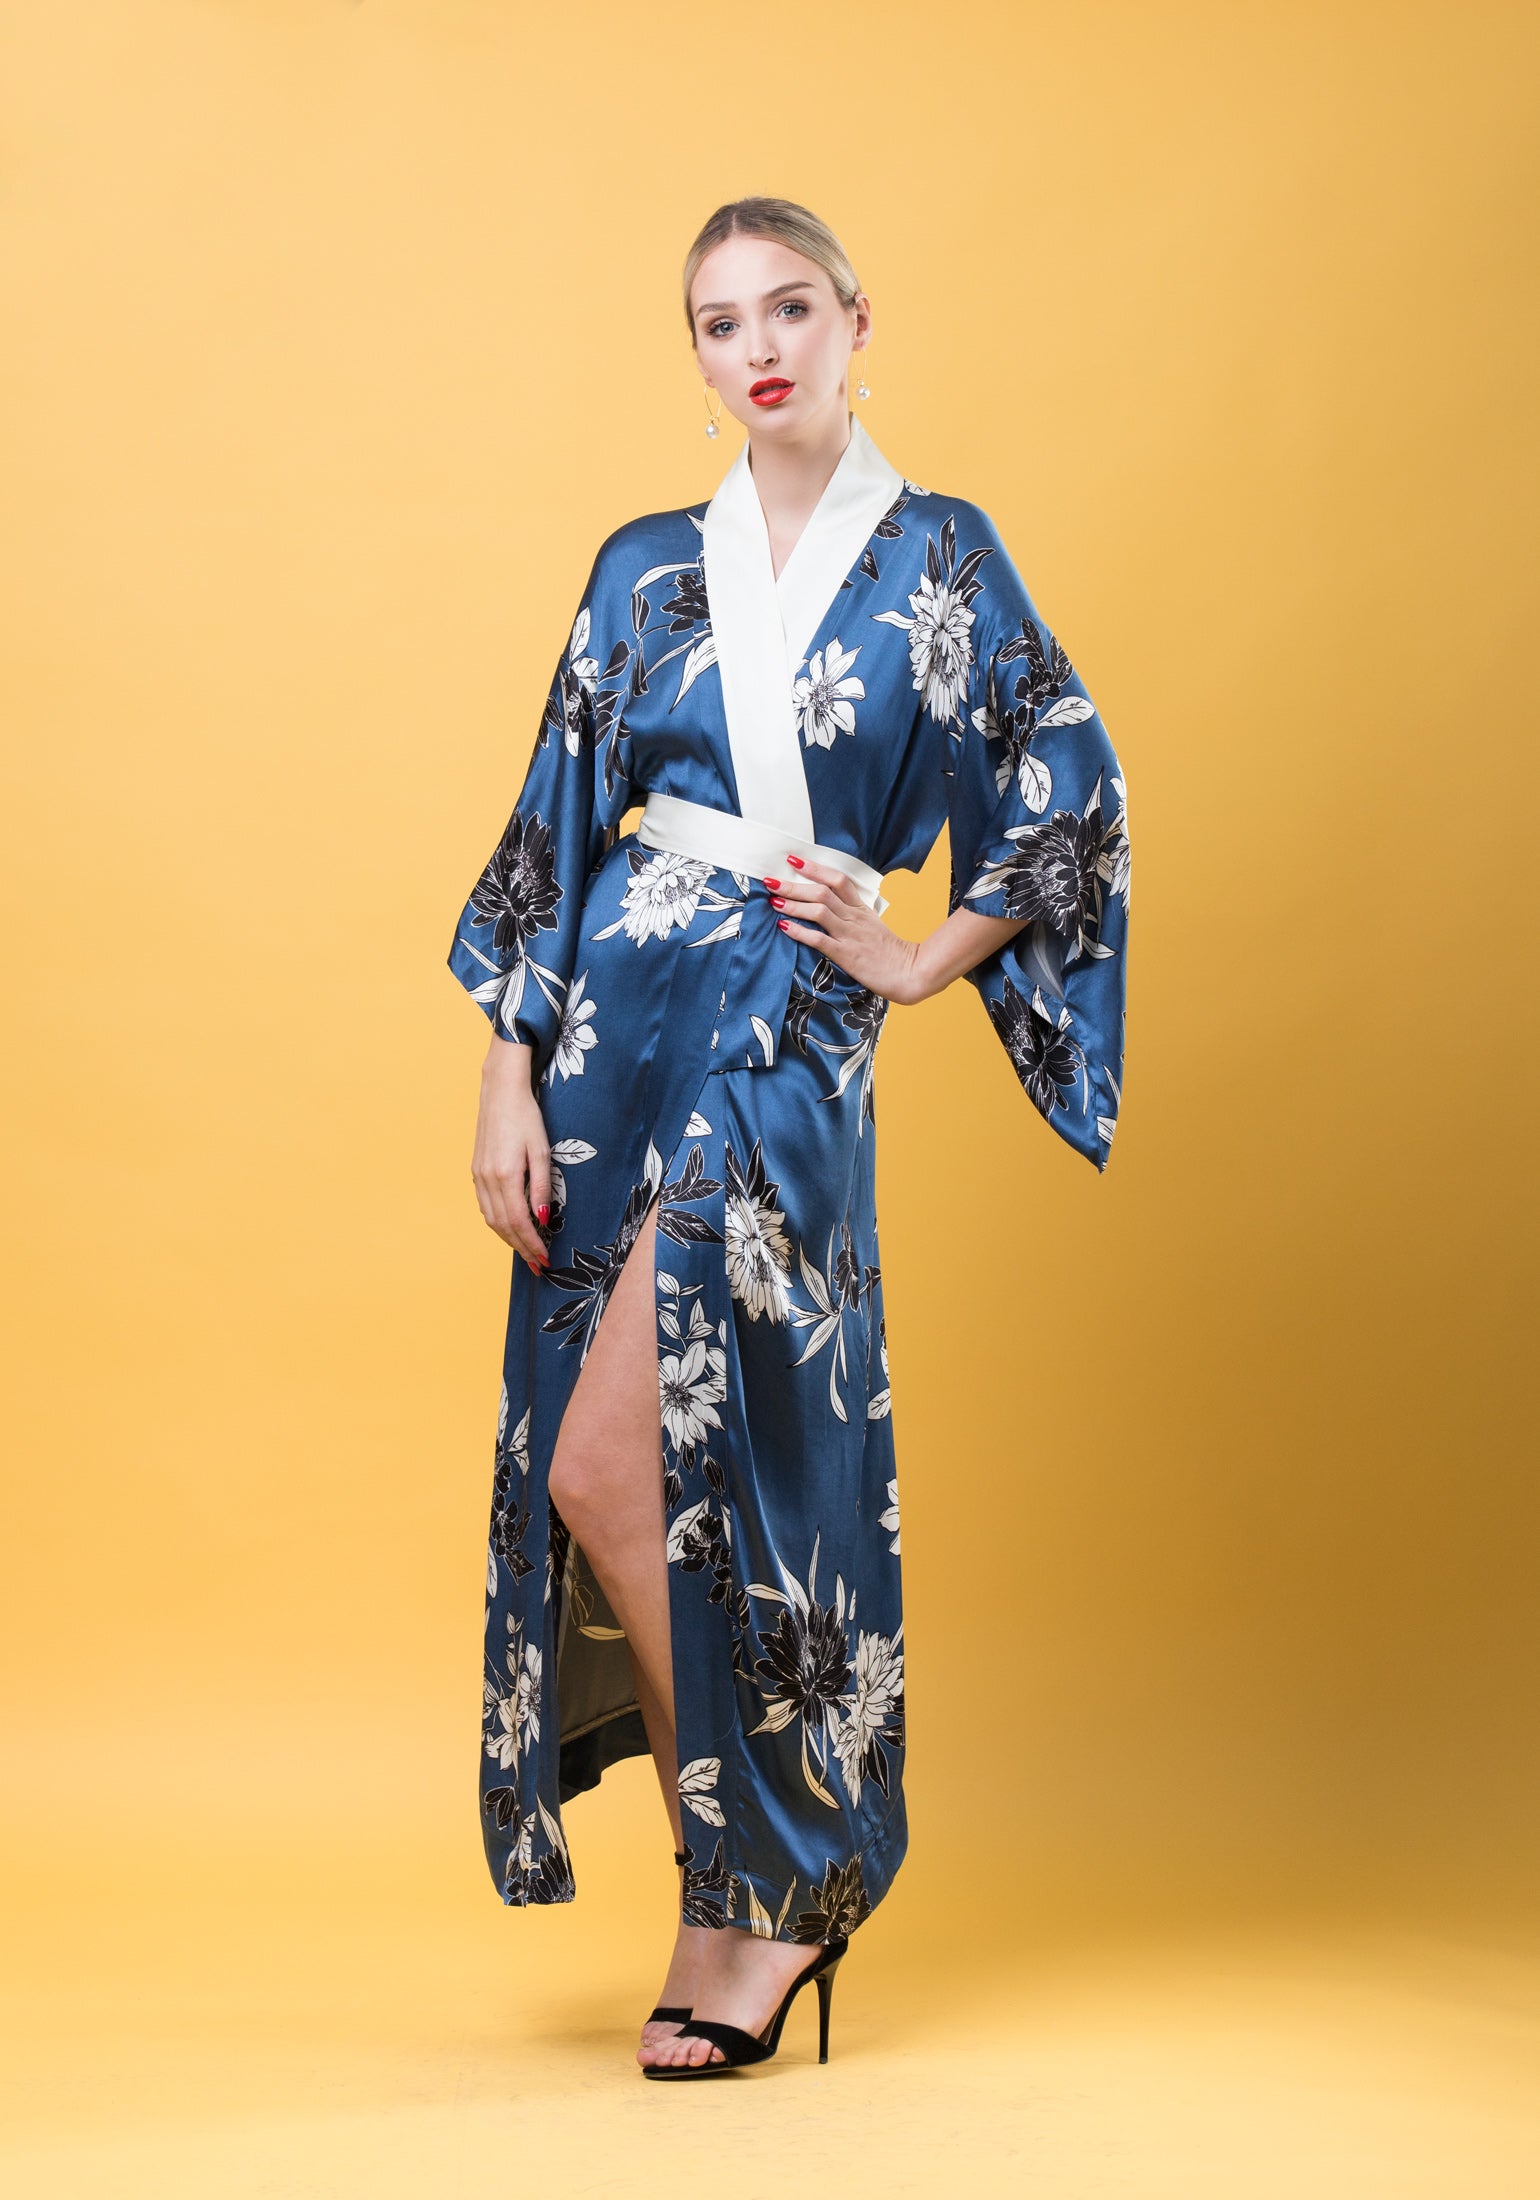 A kimono substitute for a dress or robe